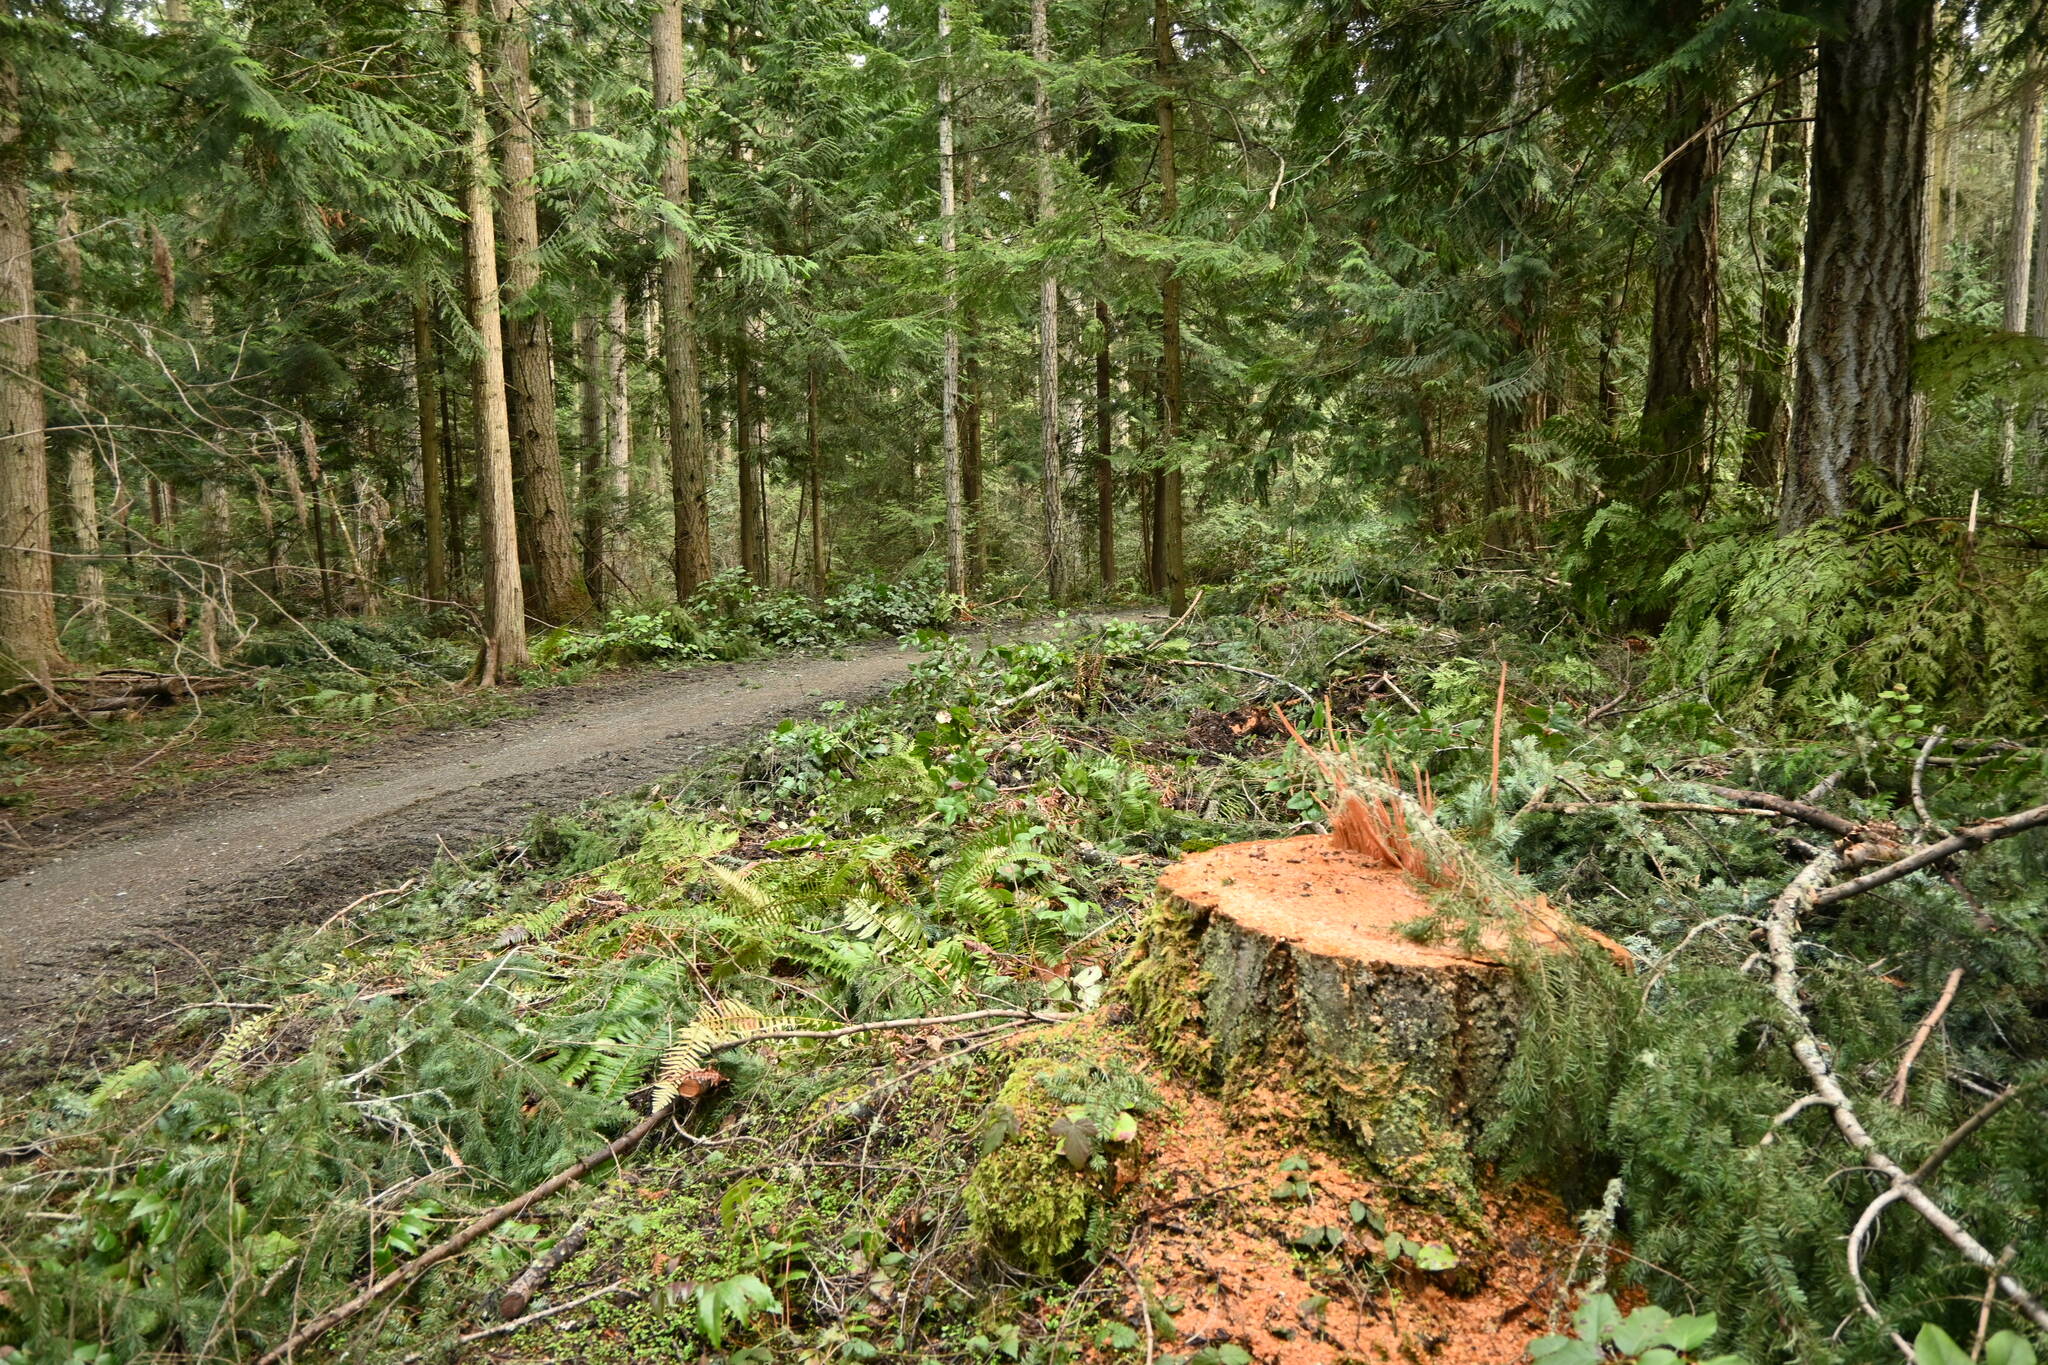 Robin Hill Farm County Park has been reopened after a three-month closure to clear trails of fallen tees and debris. (Michael Dashiell/Olympic Peninsula News Group)